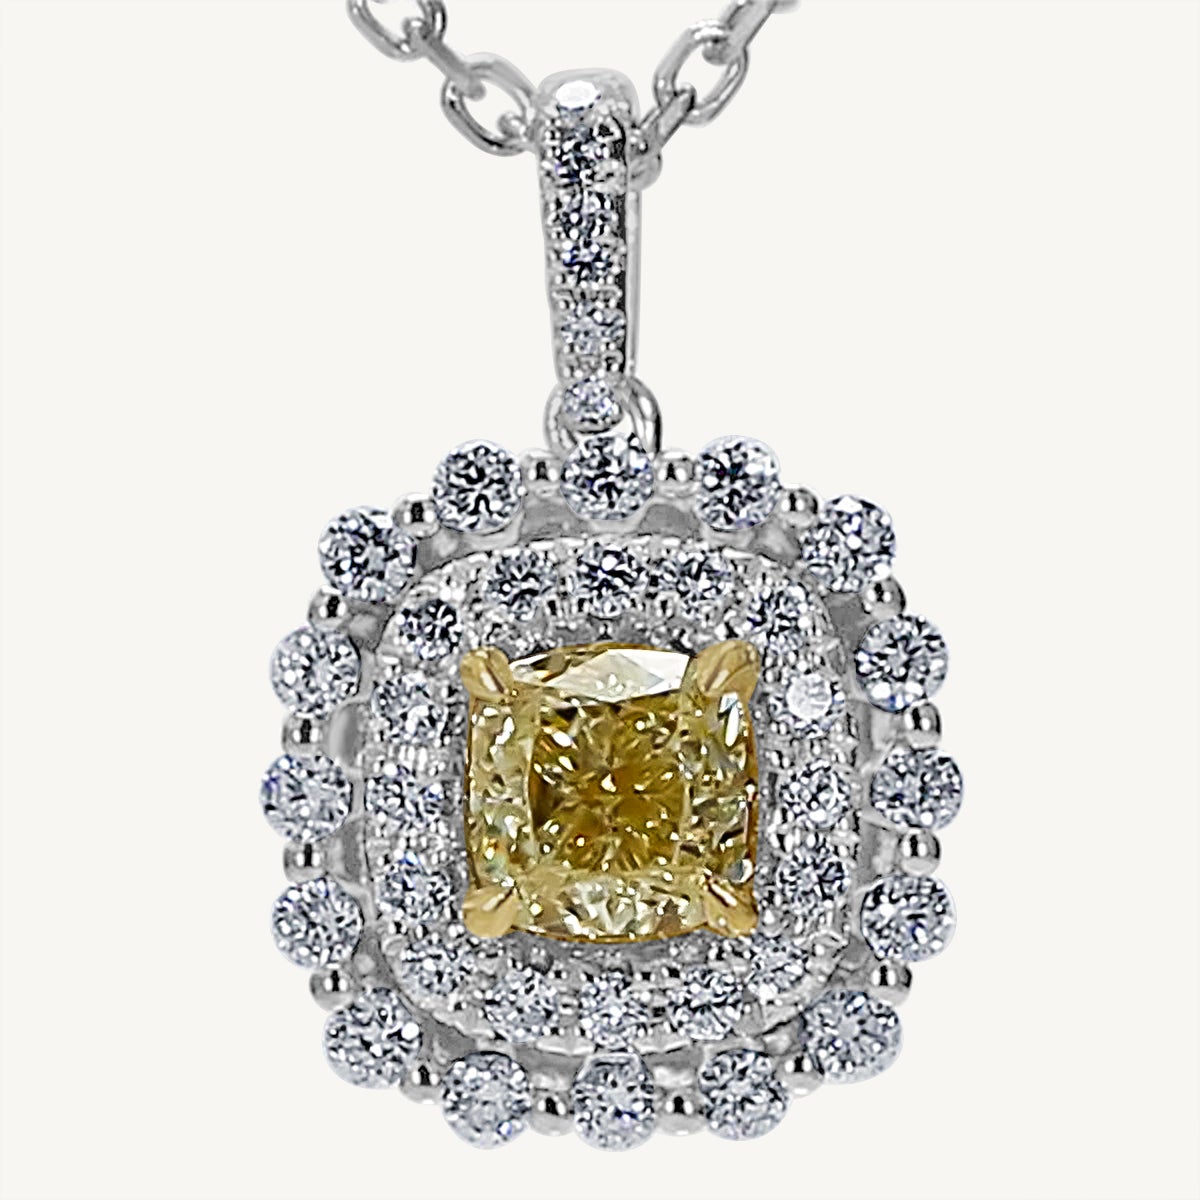 Natural Yellow Cushion and White Diamond 1.11 Carat TW Gold Drop Pendant For Sale